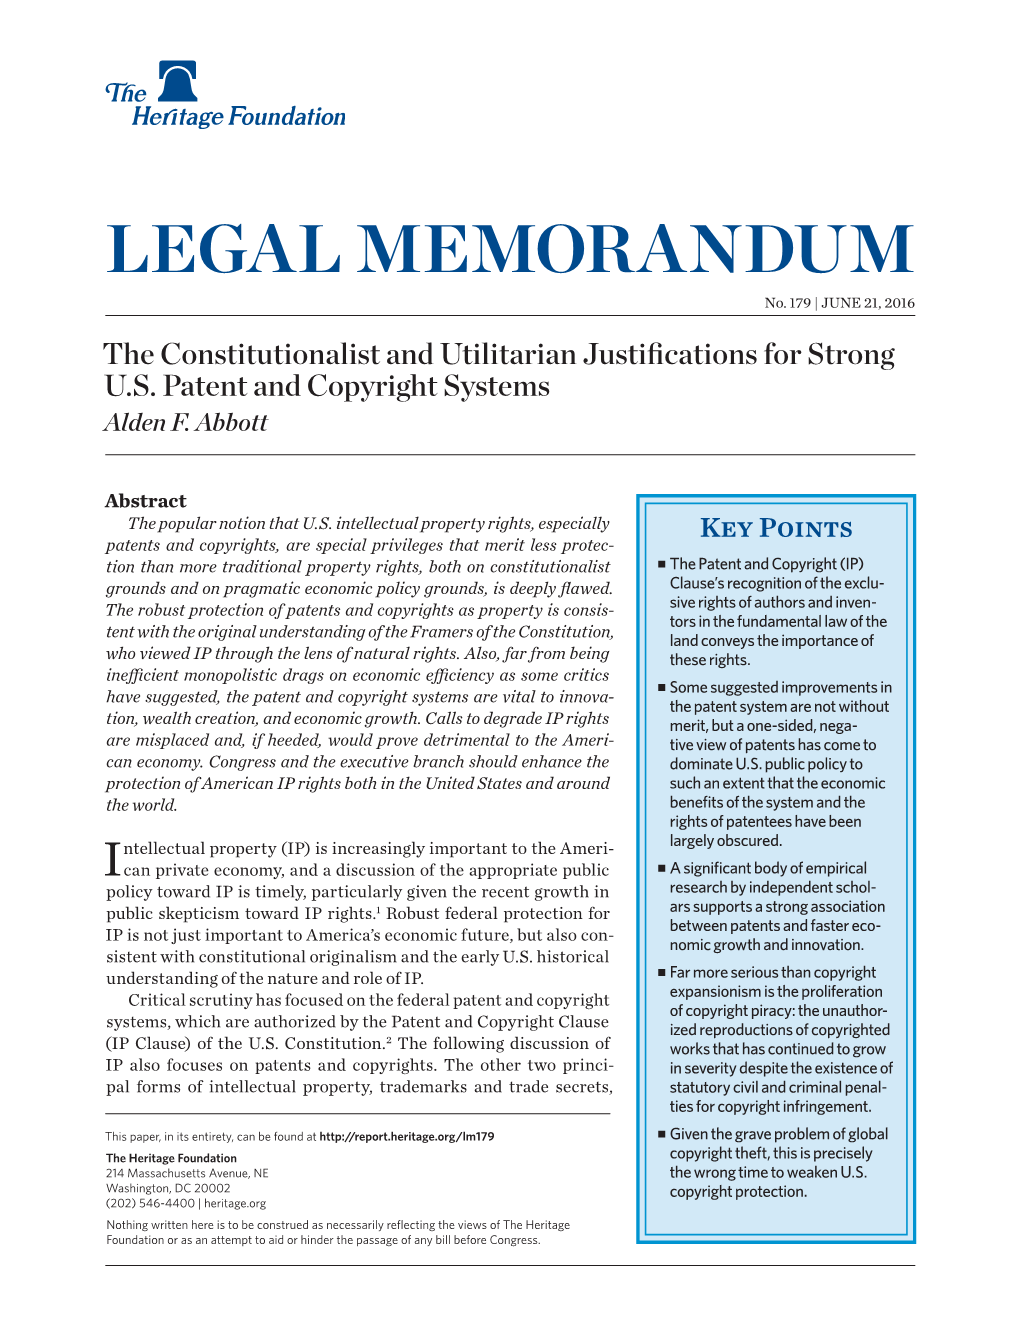 The Constitutionalist and Utilitarian Justifications for Strong U.S. Patent and Copyright Systems Alden F